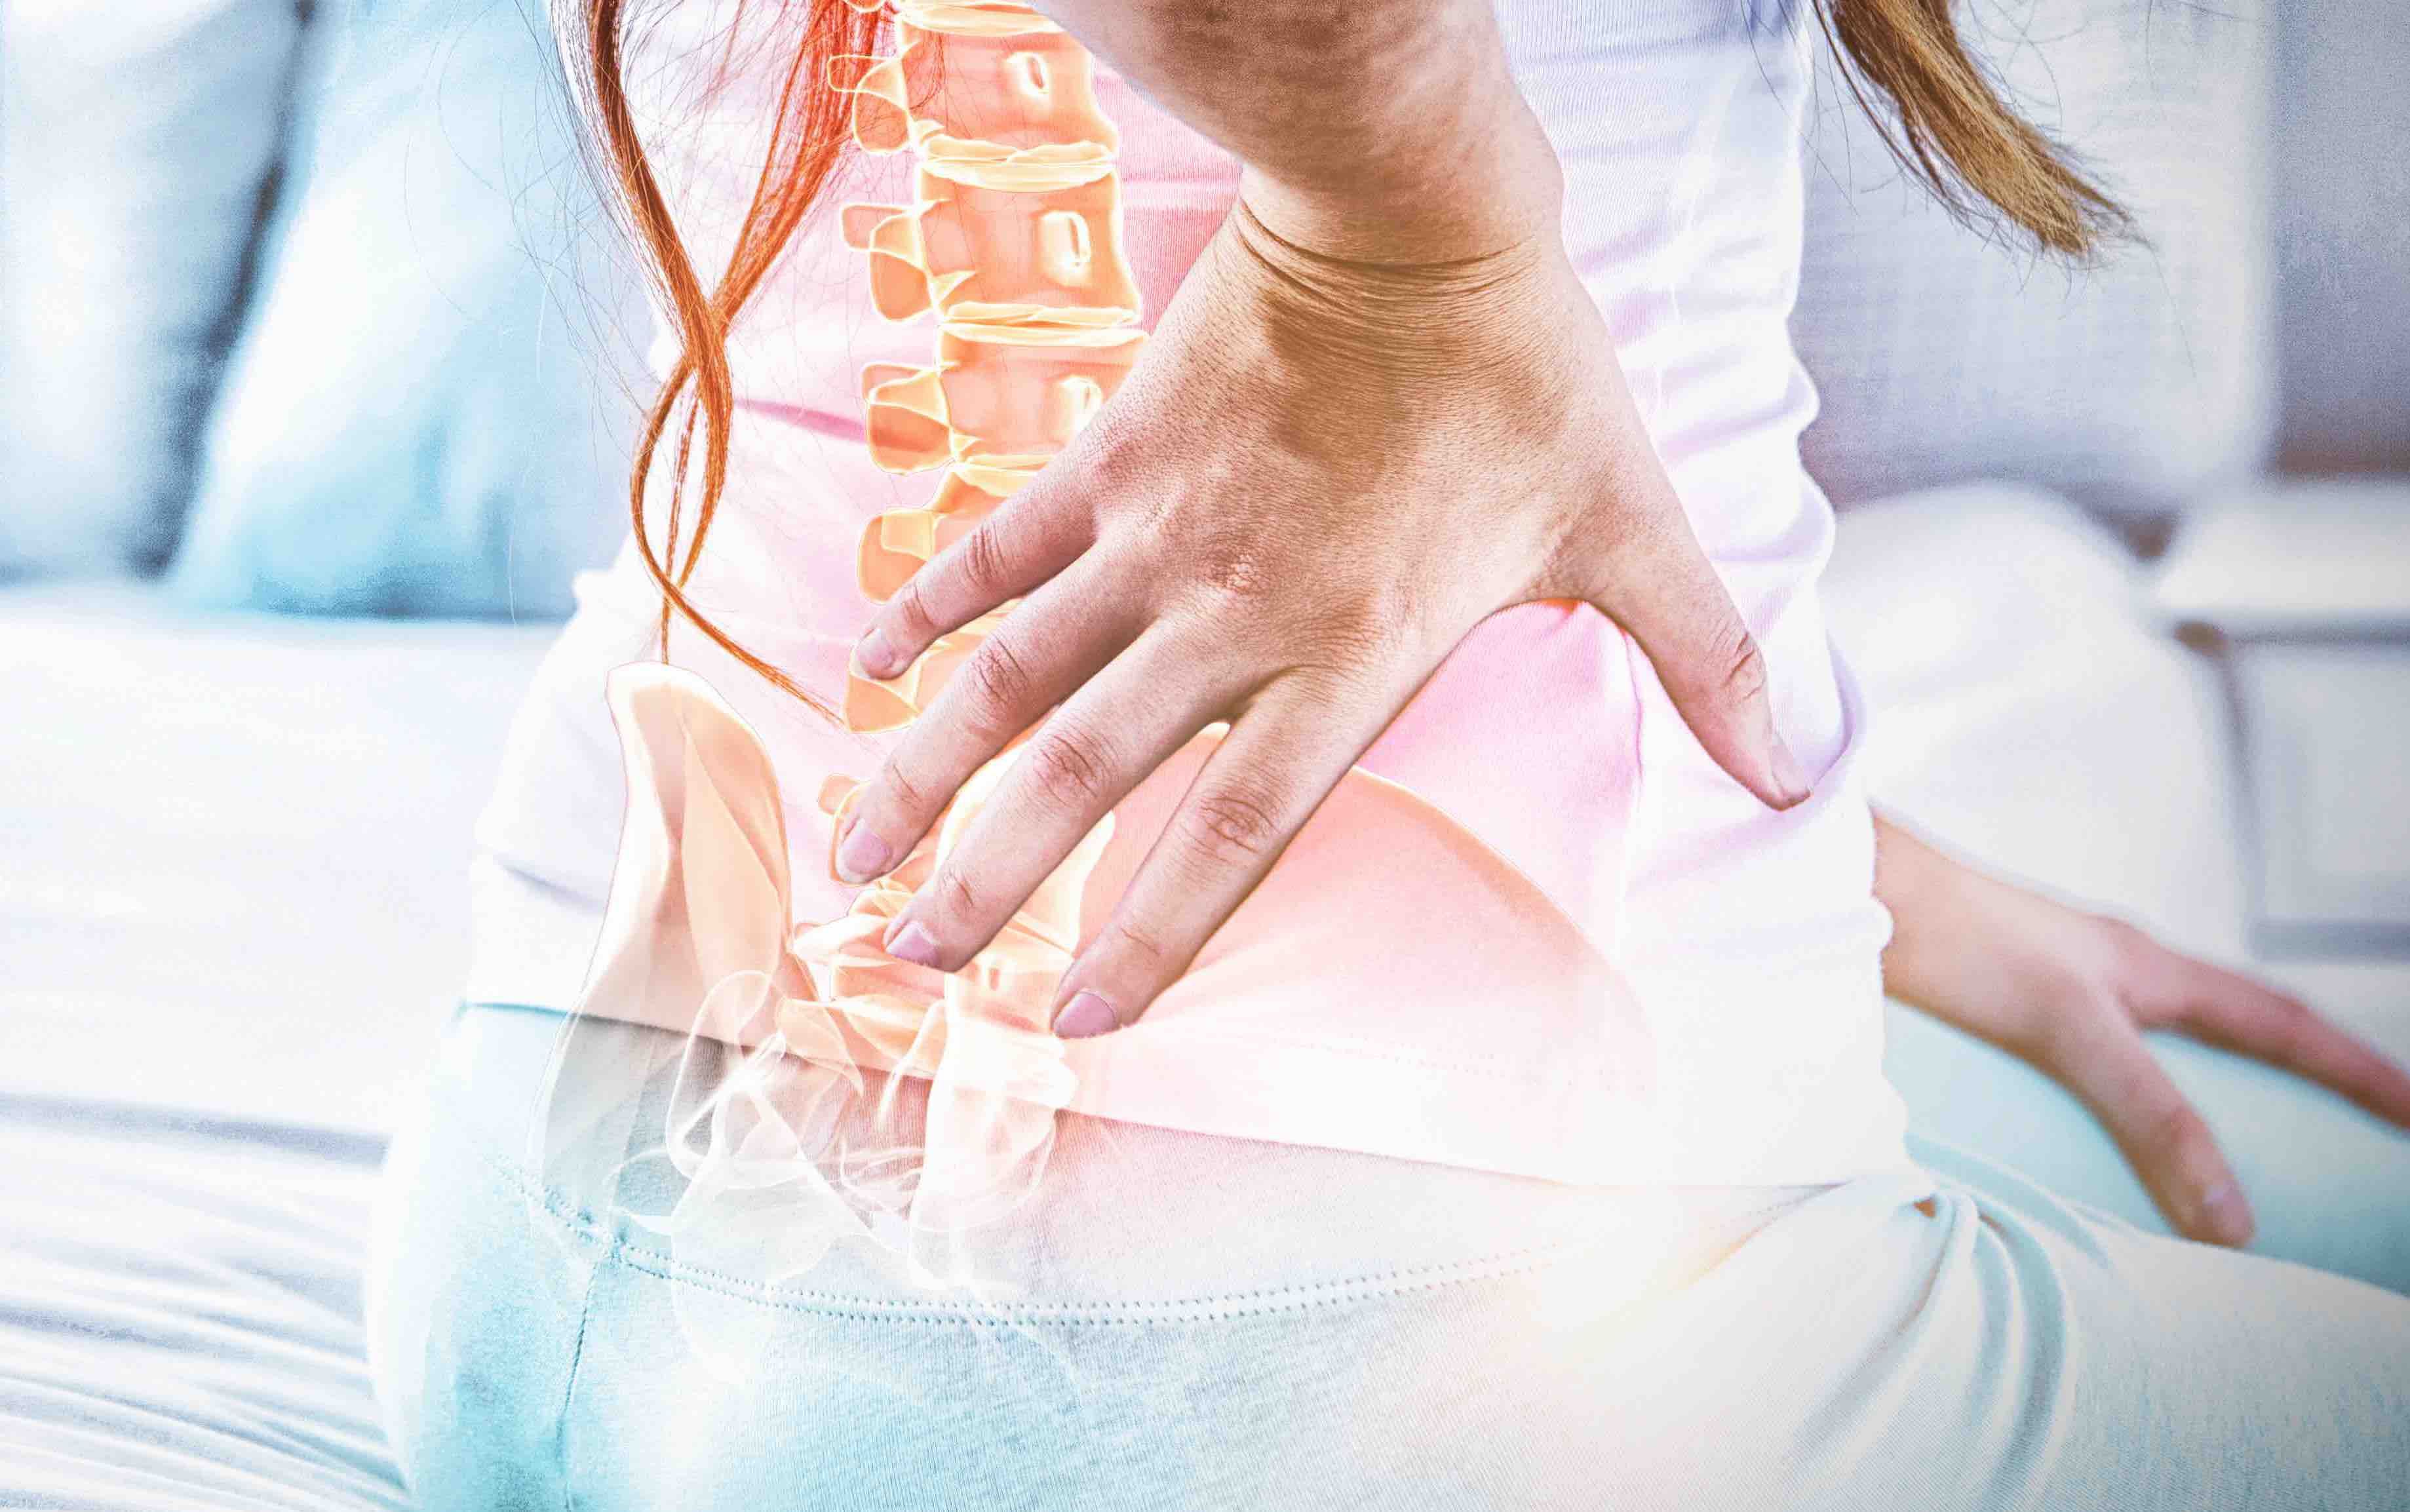 Woman with back pain |  Image credit: vectorfusionart - stock.adobe.com